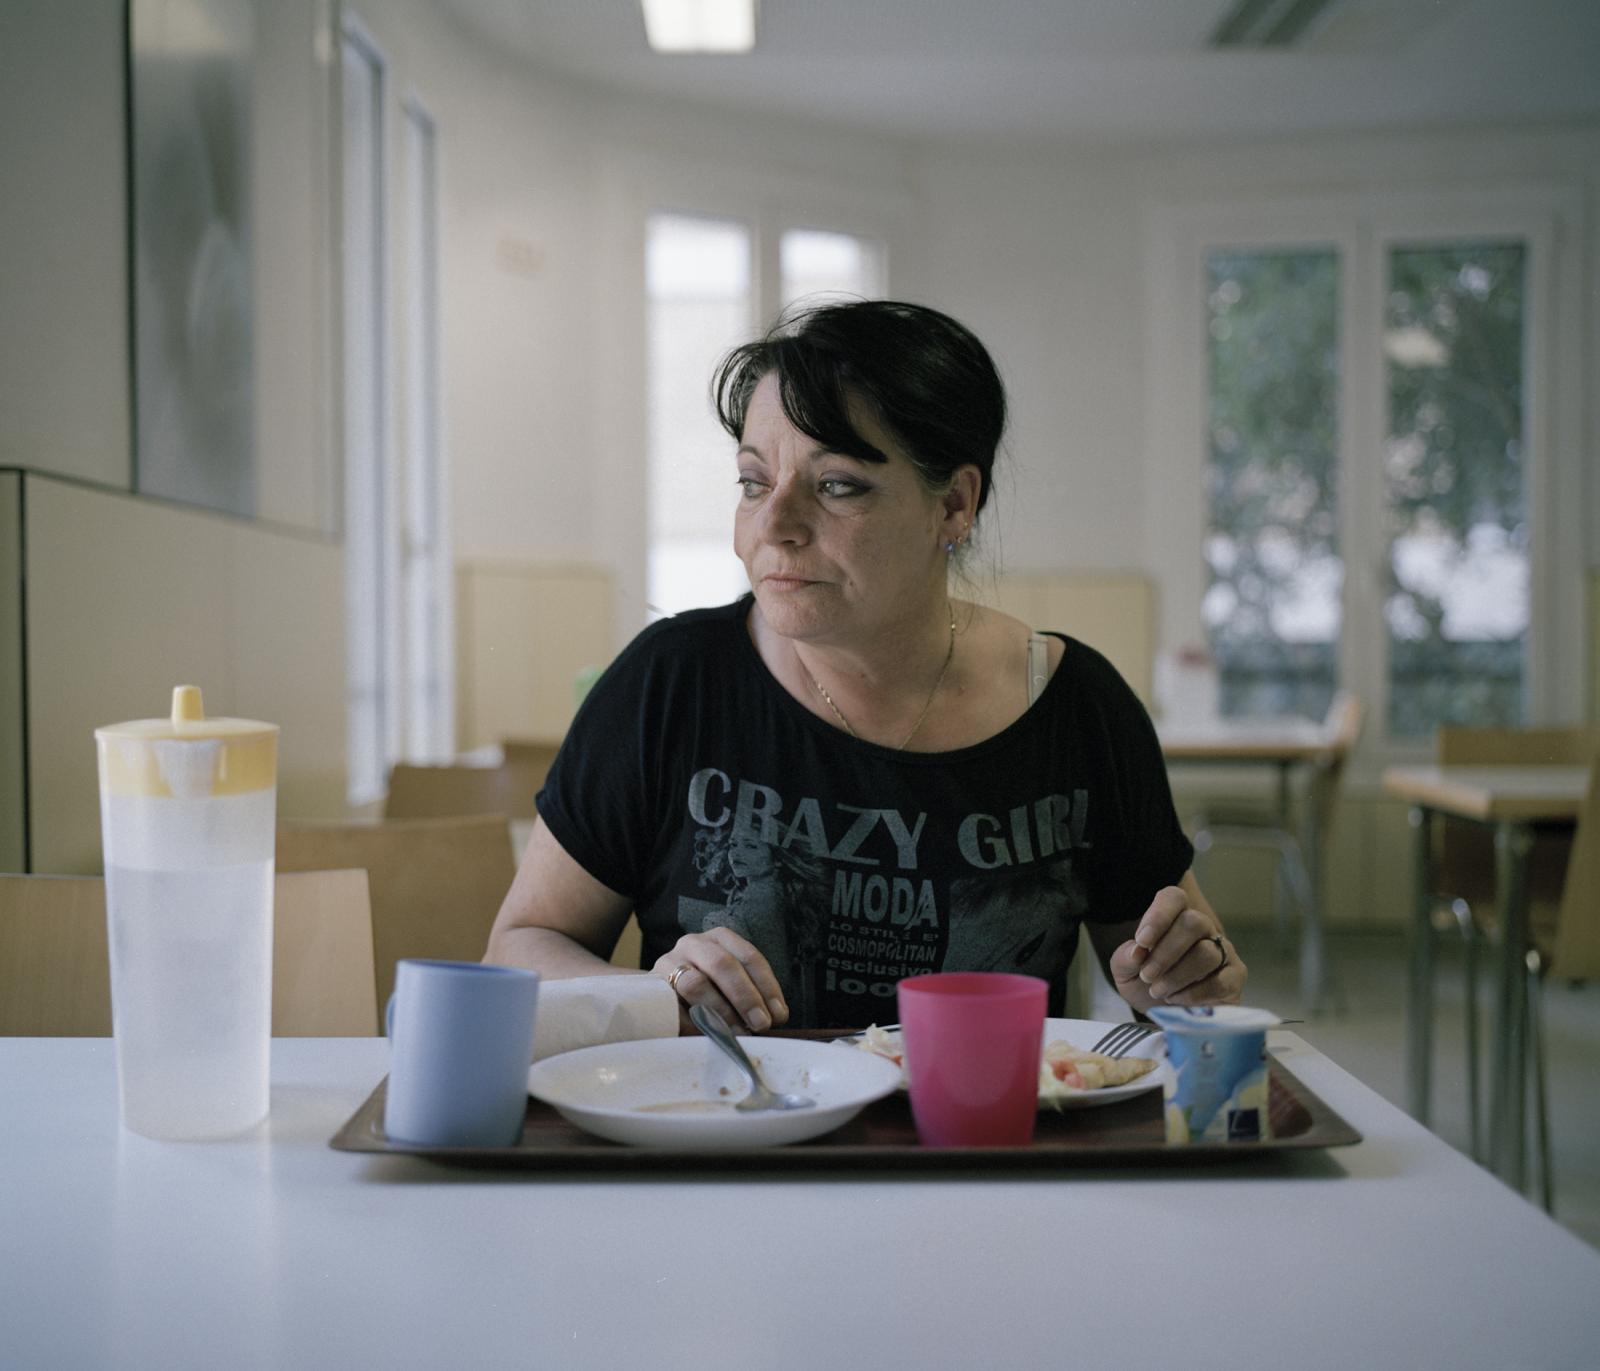 Carmen Gil, unemployed, eats lunch a a government canteen in Barcelona where meals are provided for those in need. She squats in a flat with her daughter and granddaughter where they all live with &euro;426 monthly income support from the government.